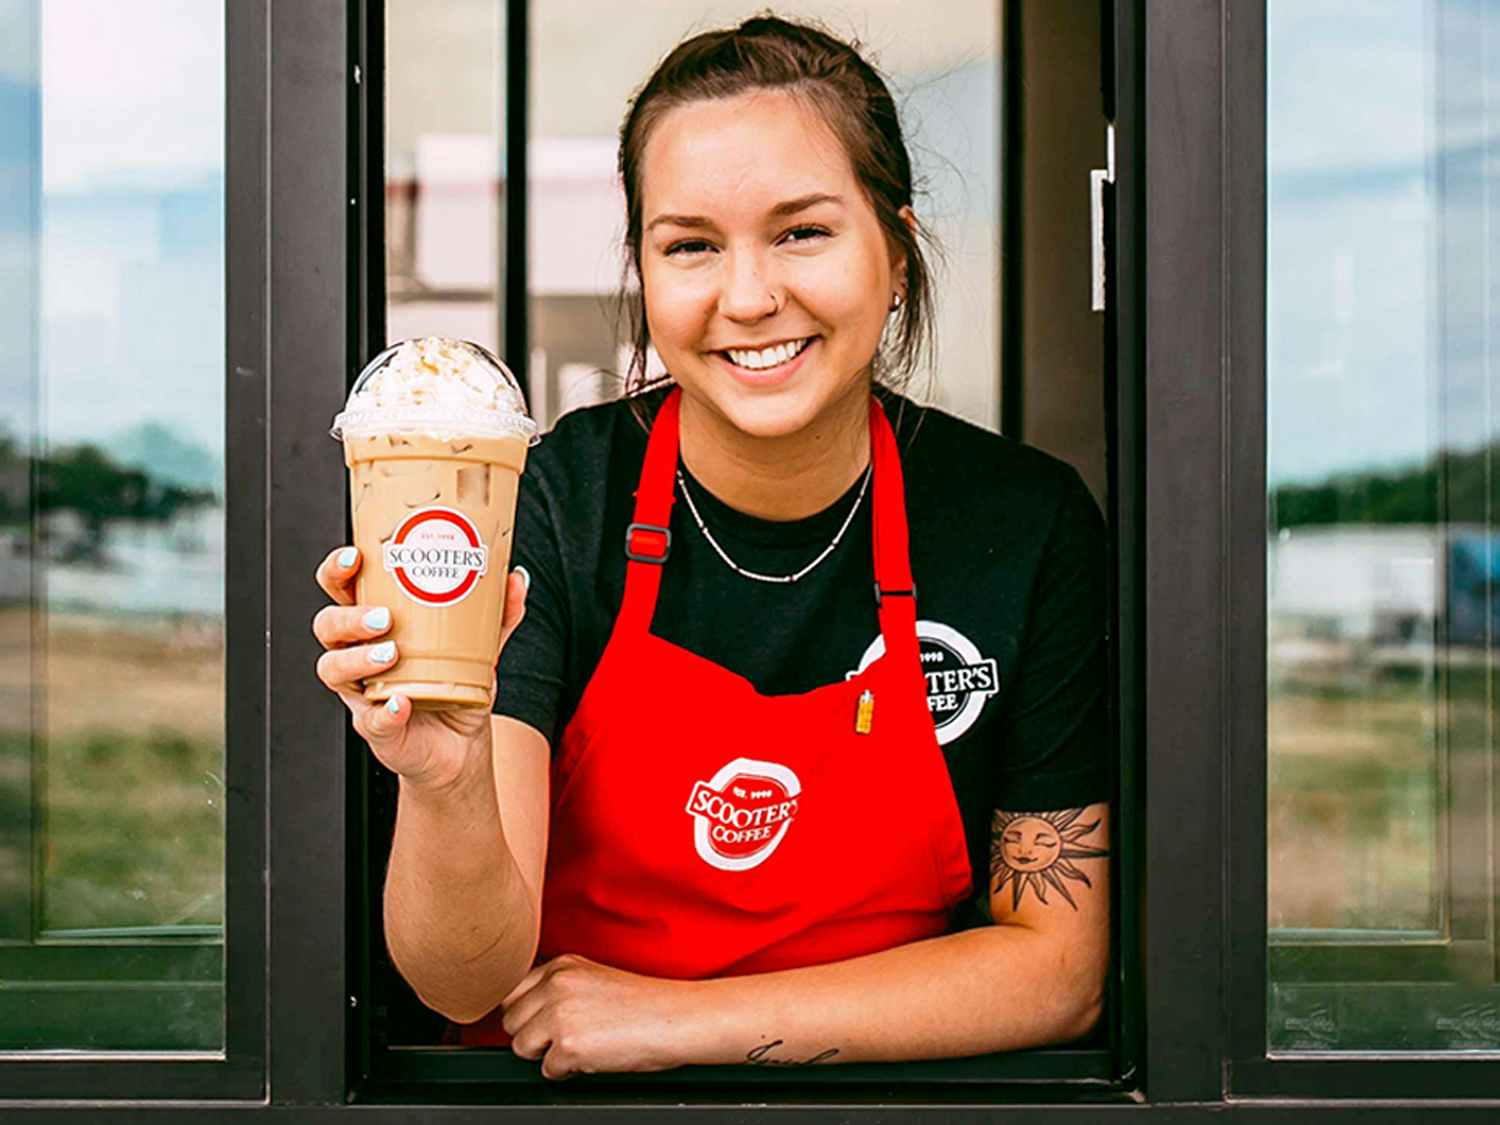 a person holding up a coffee from scooters coffee while smiling